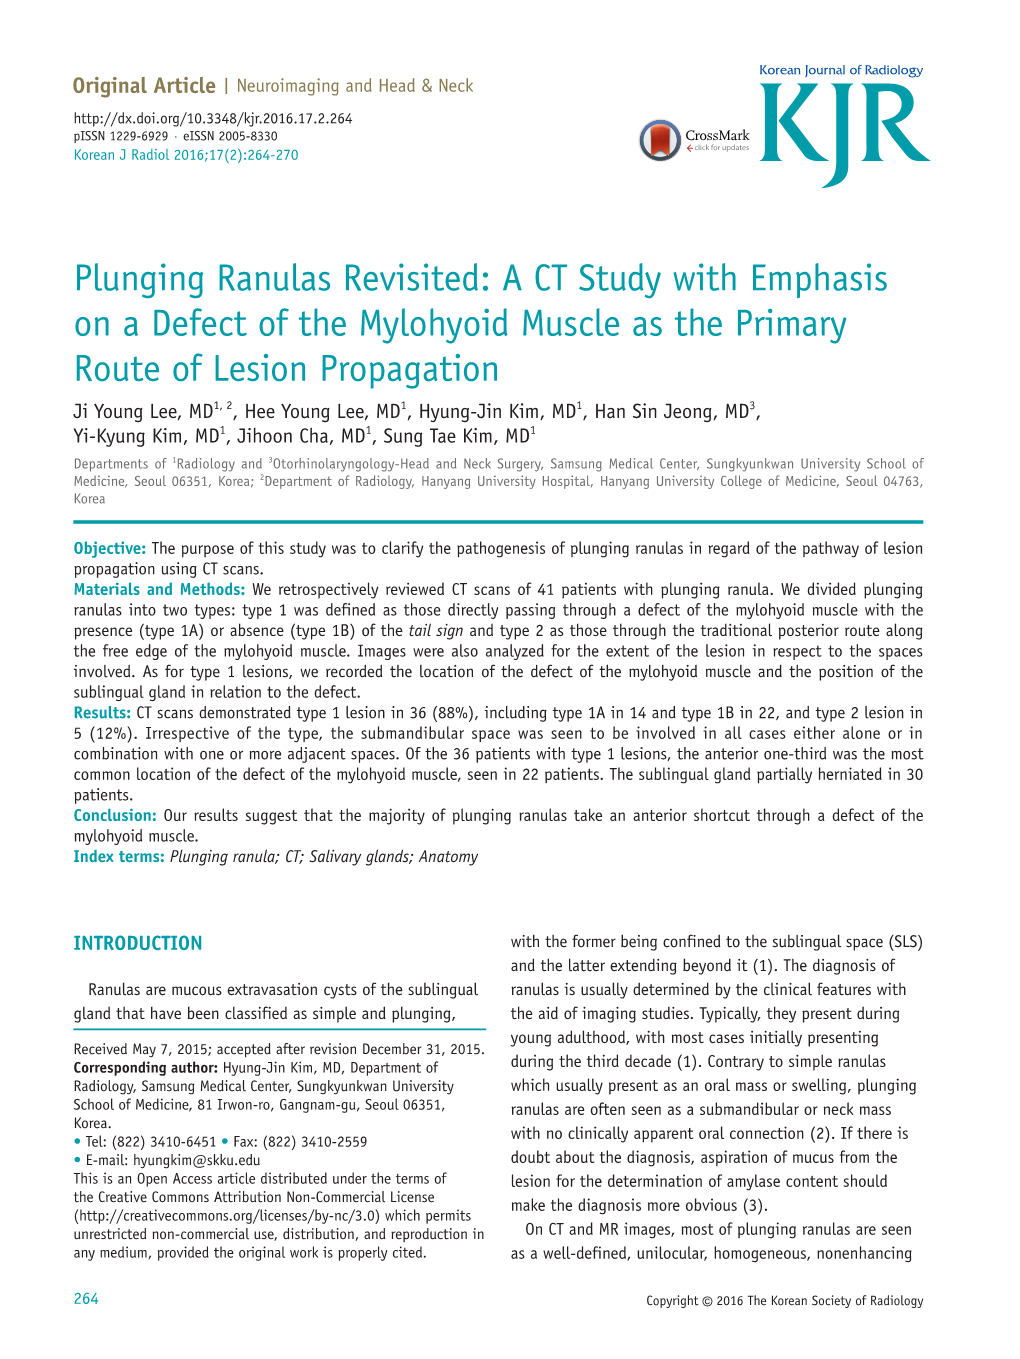 Plunging Ranulas Revisited: a CT Study with Emphasis on a Defect Of